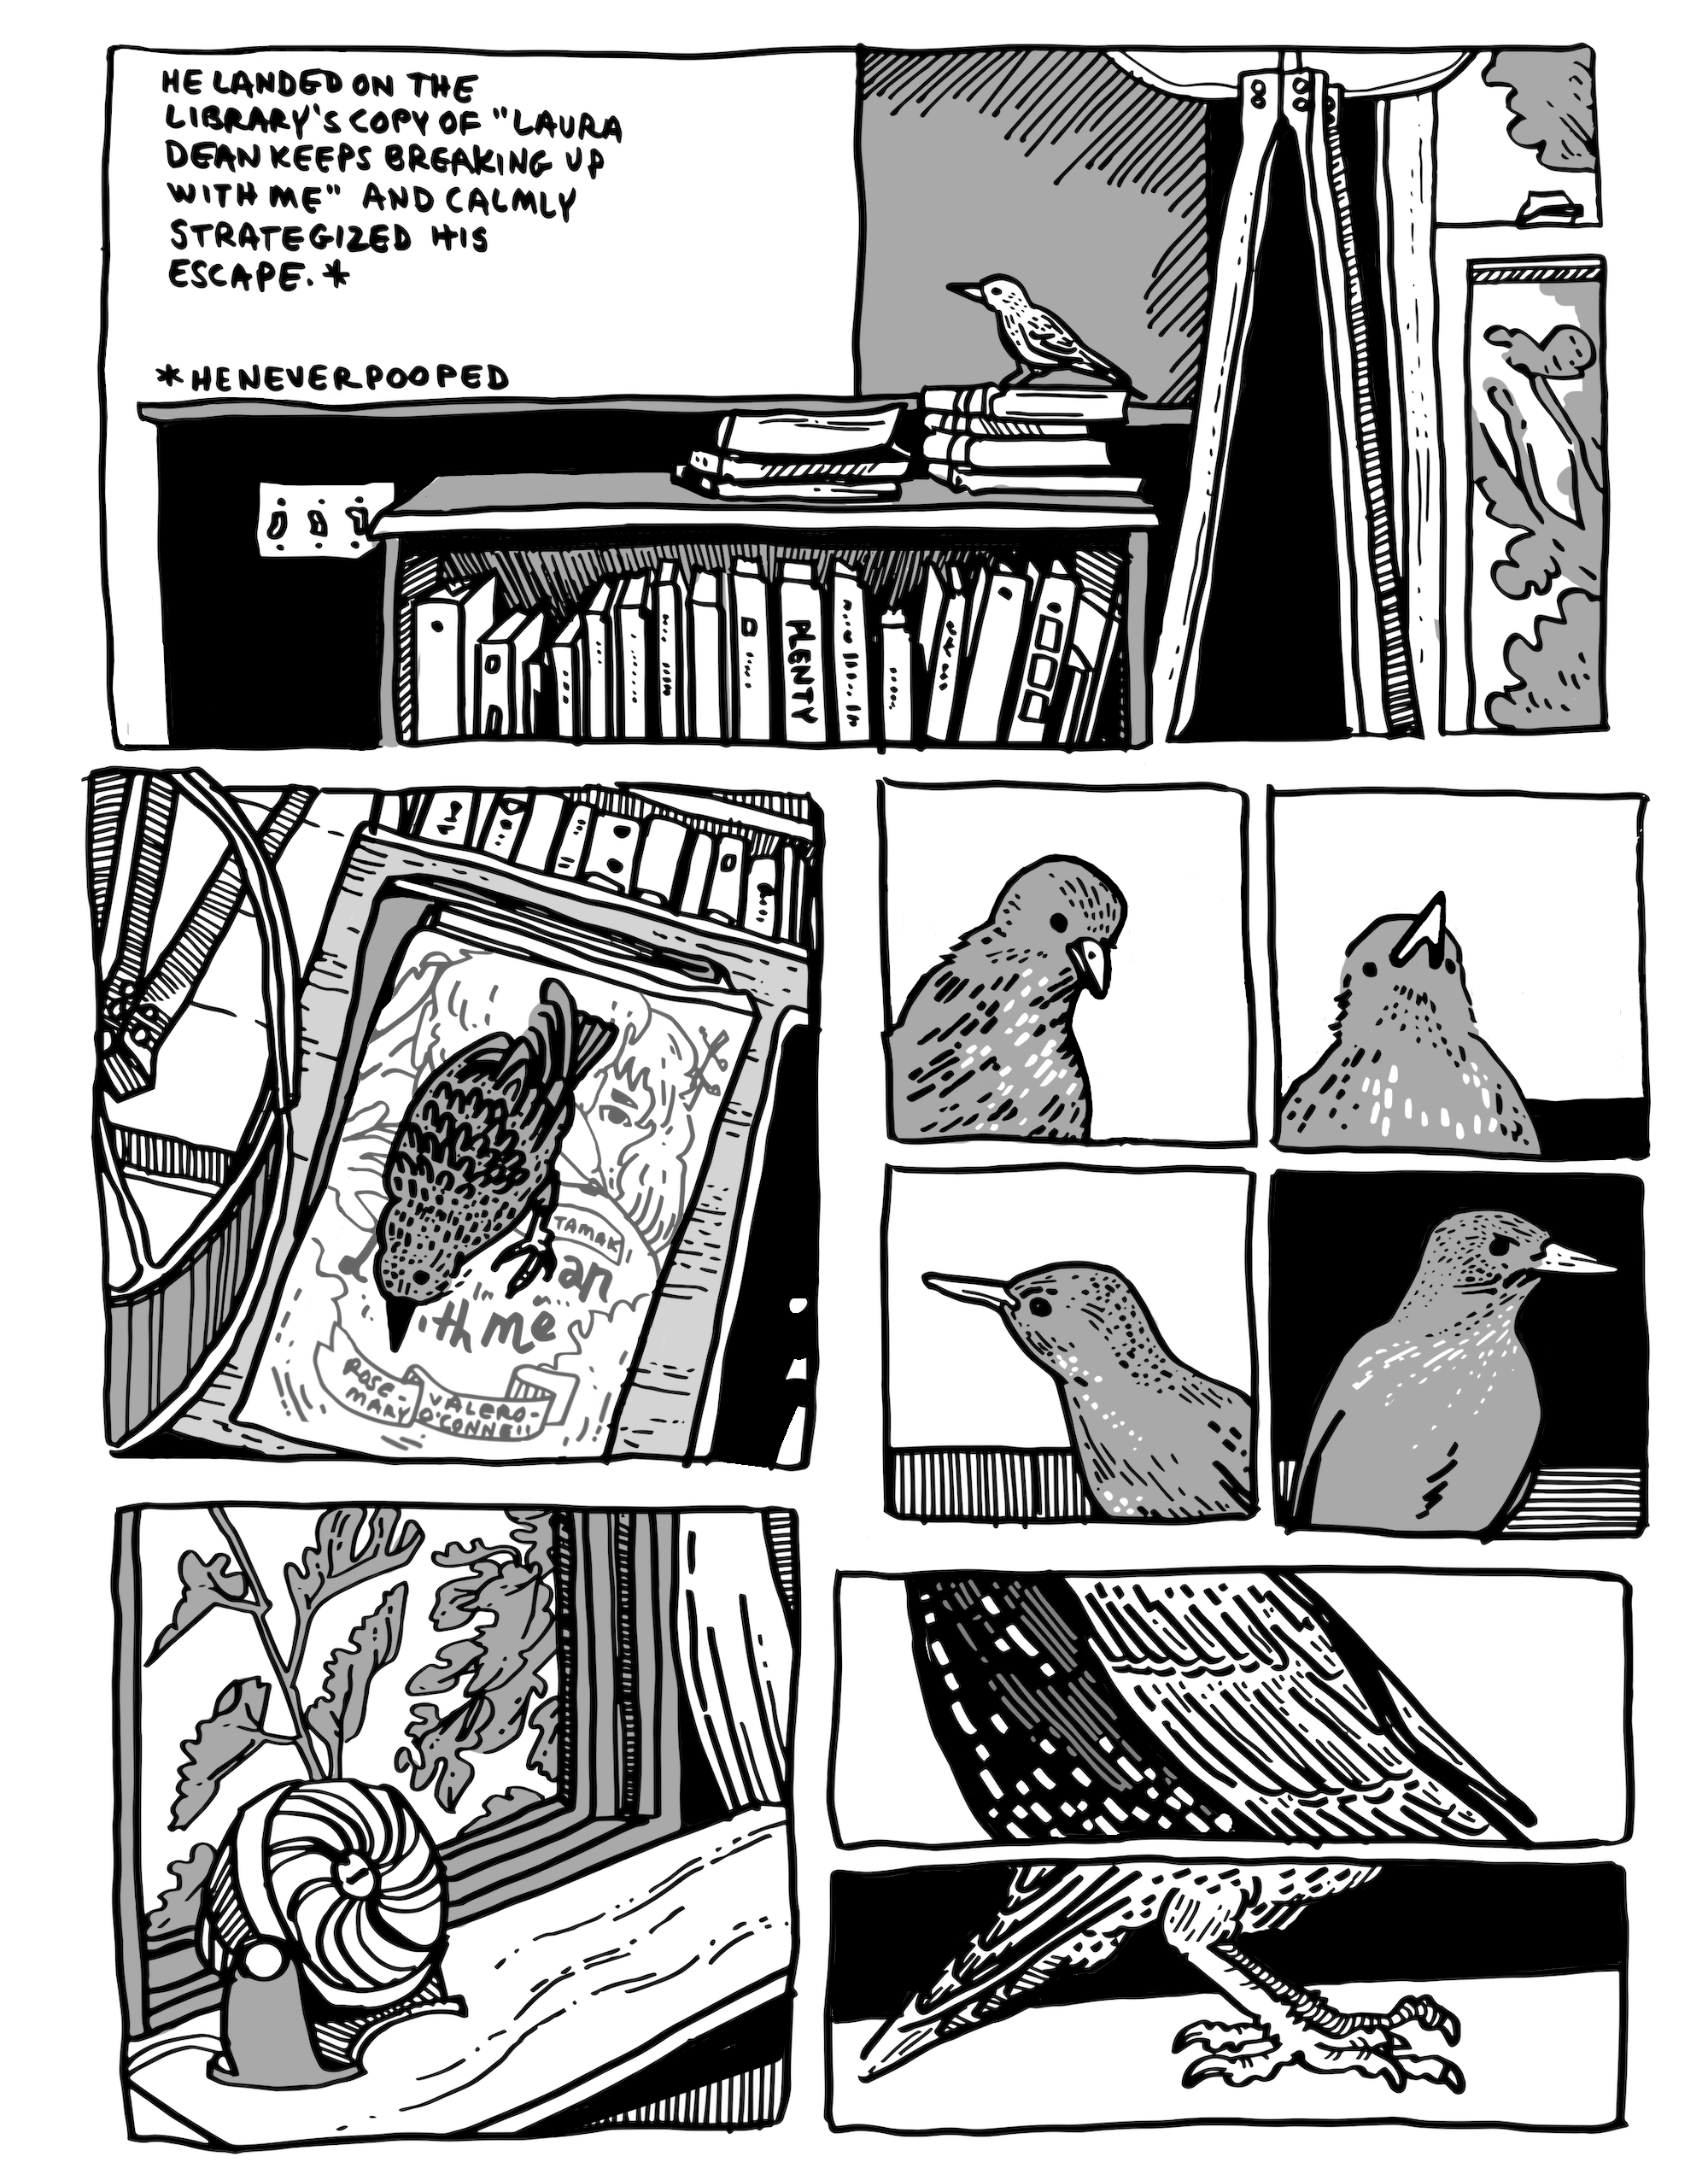 full comics page 4 about DIY wildlife removal